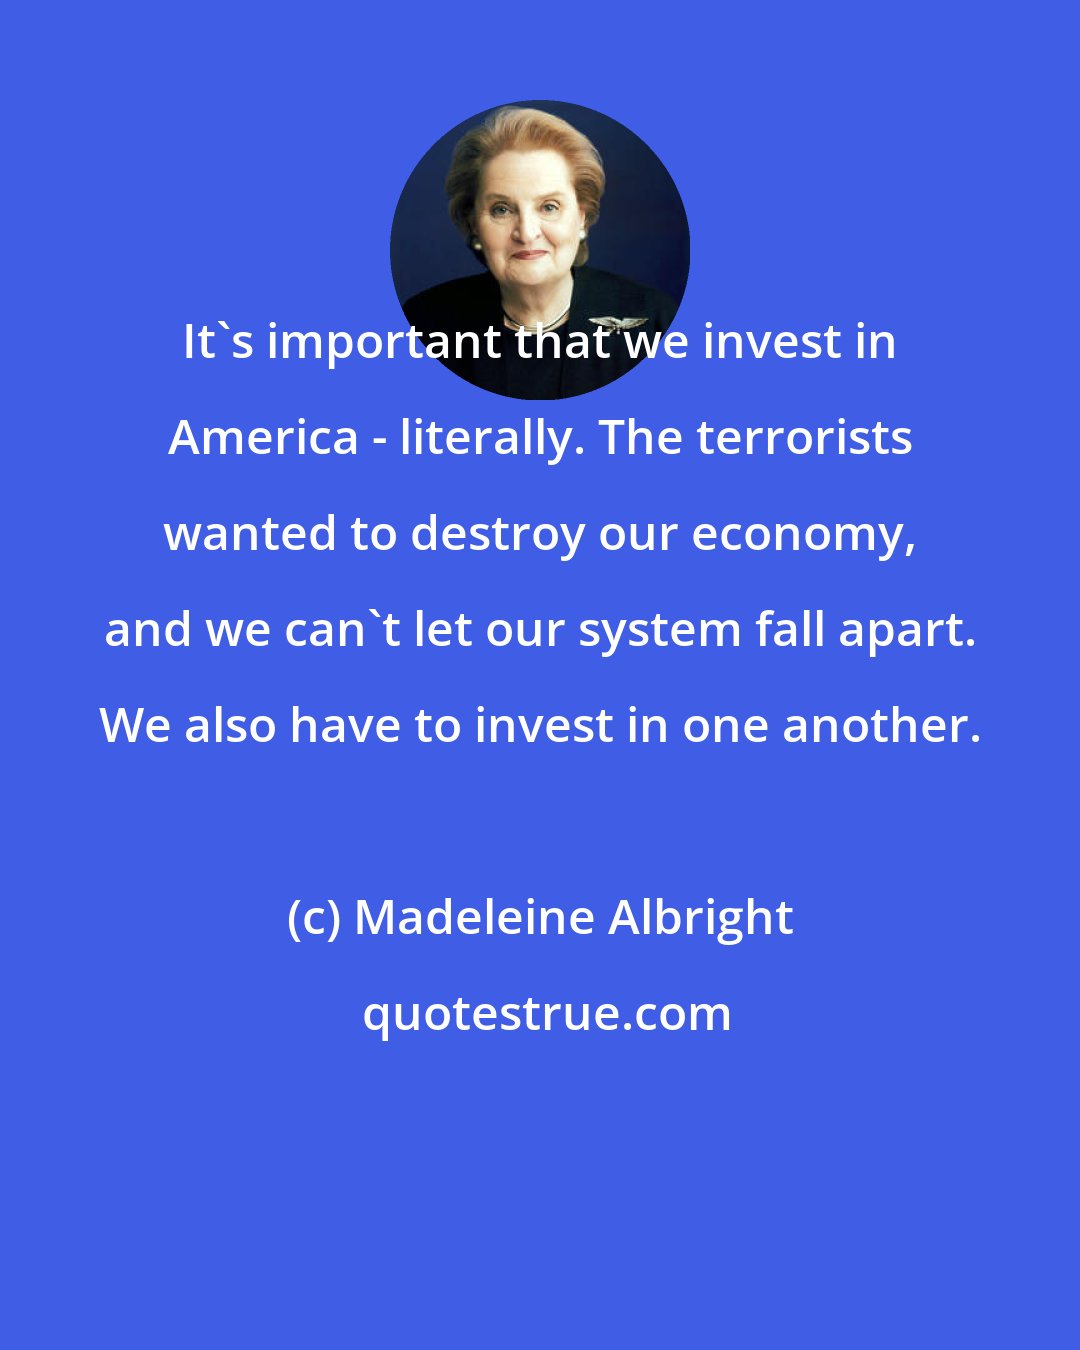 Madeleine Albright: It's important that we invest in America - literally. The terrorists wanted to destroy our economy, and we can't let our system fall apart. We also have to invest in one another.